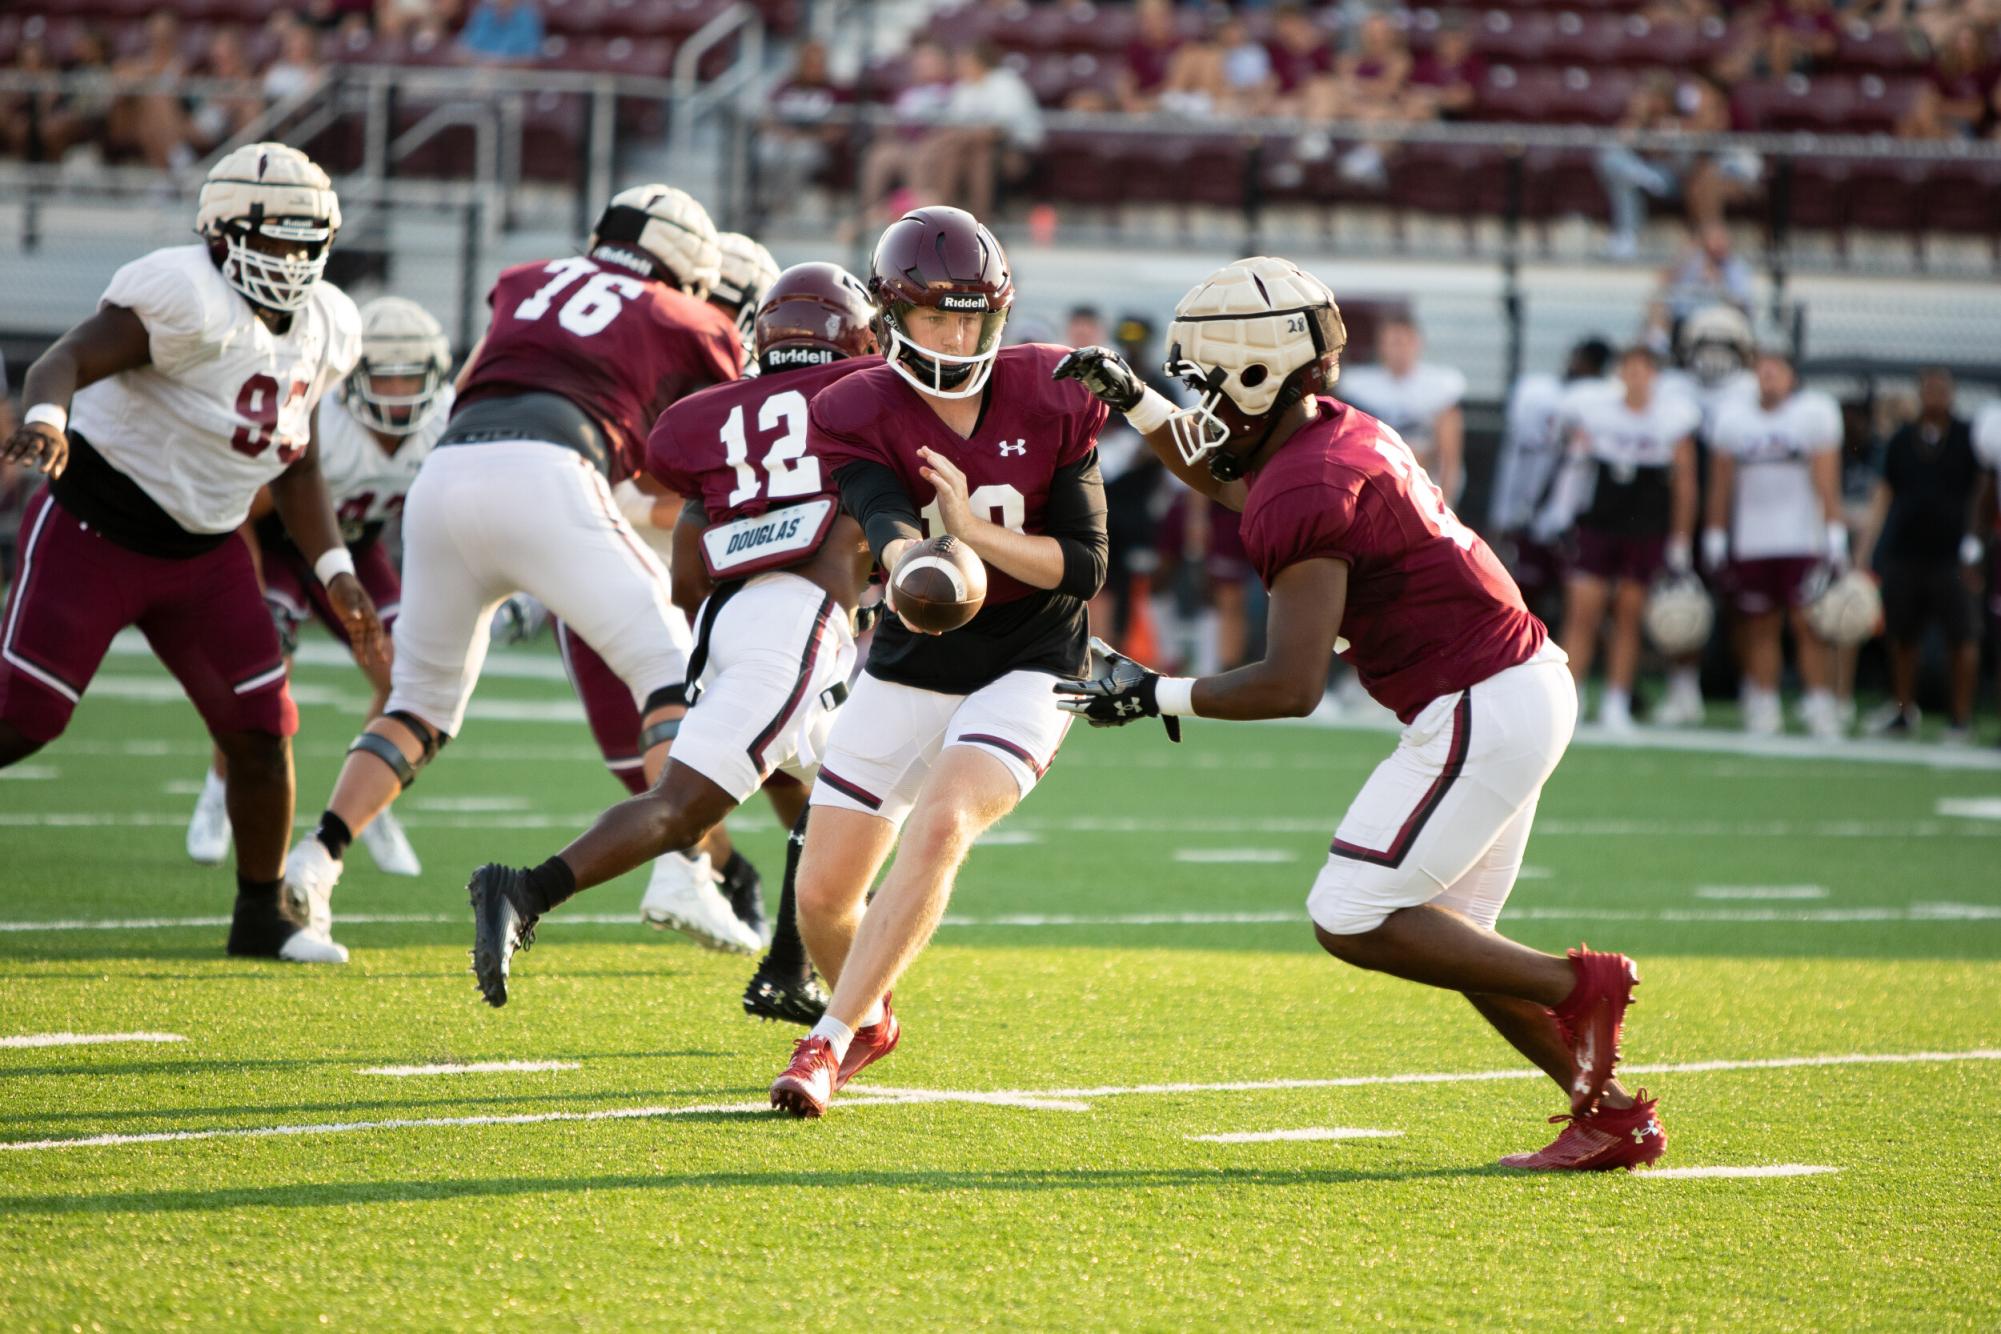 Saluki sports look to make noise this fall